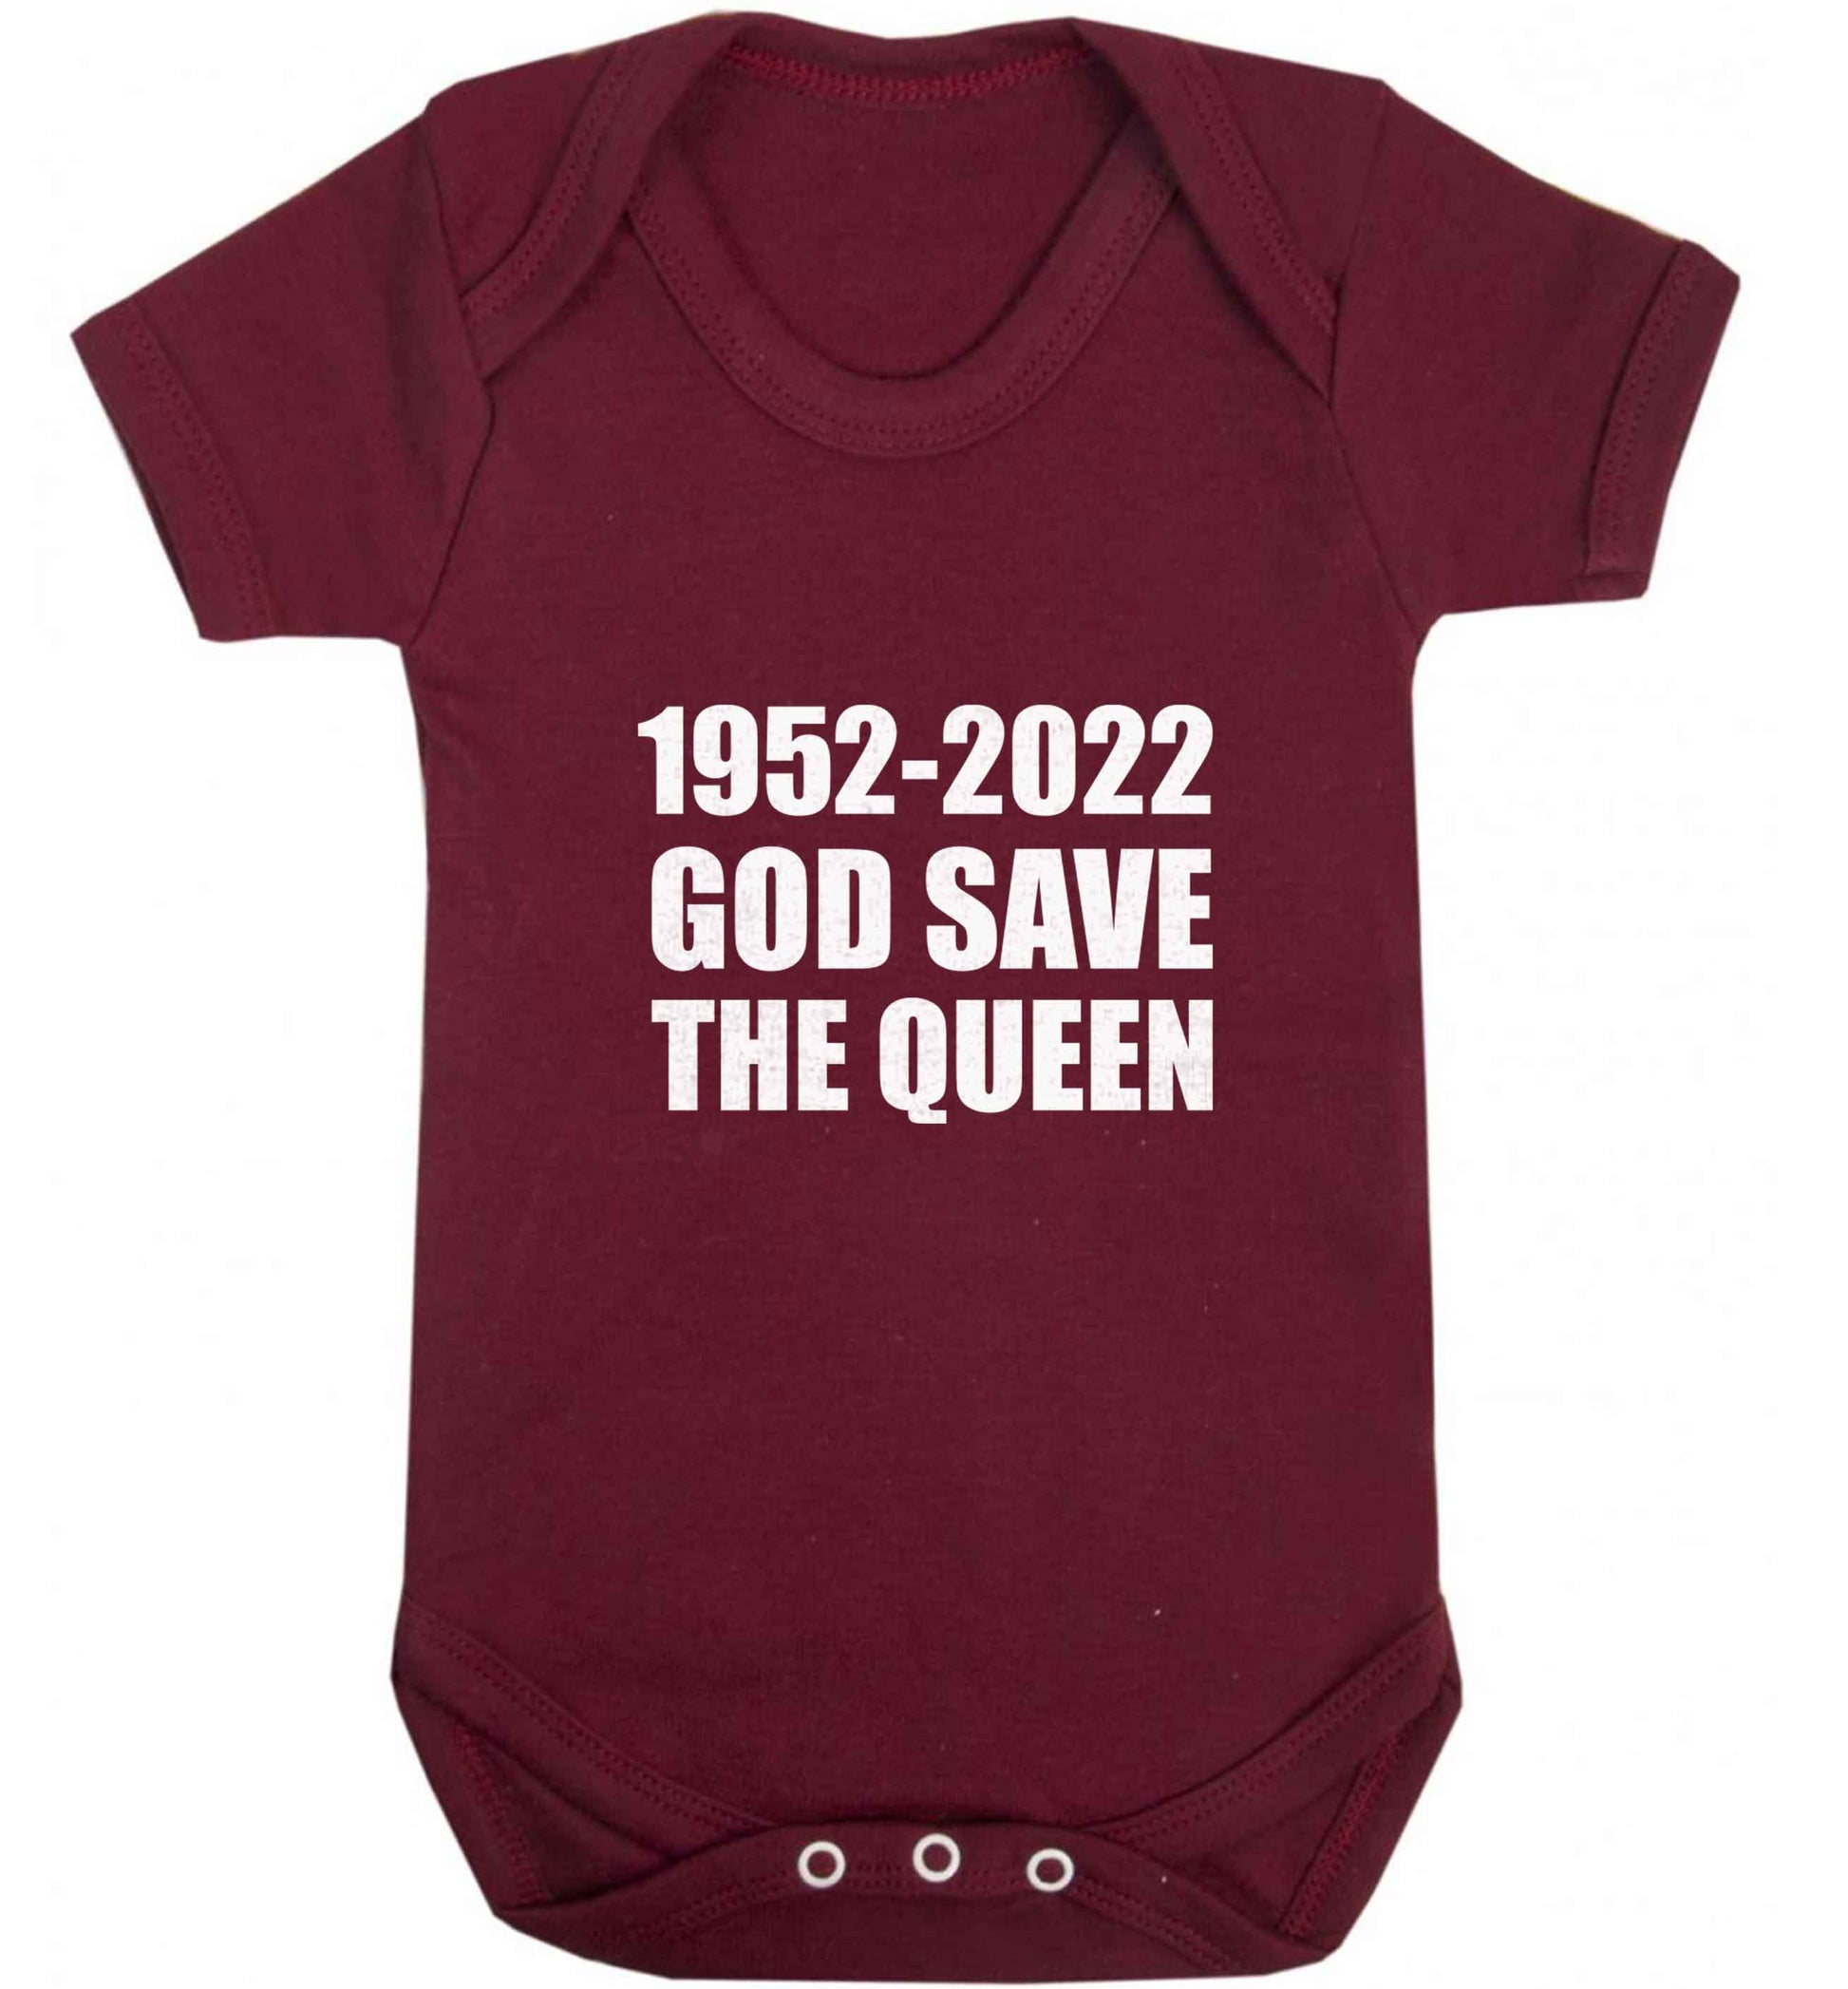 God save the queen baby vest maroon 18-24 months